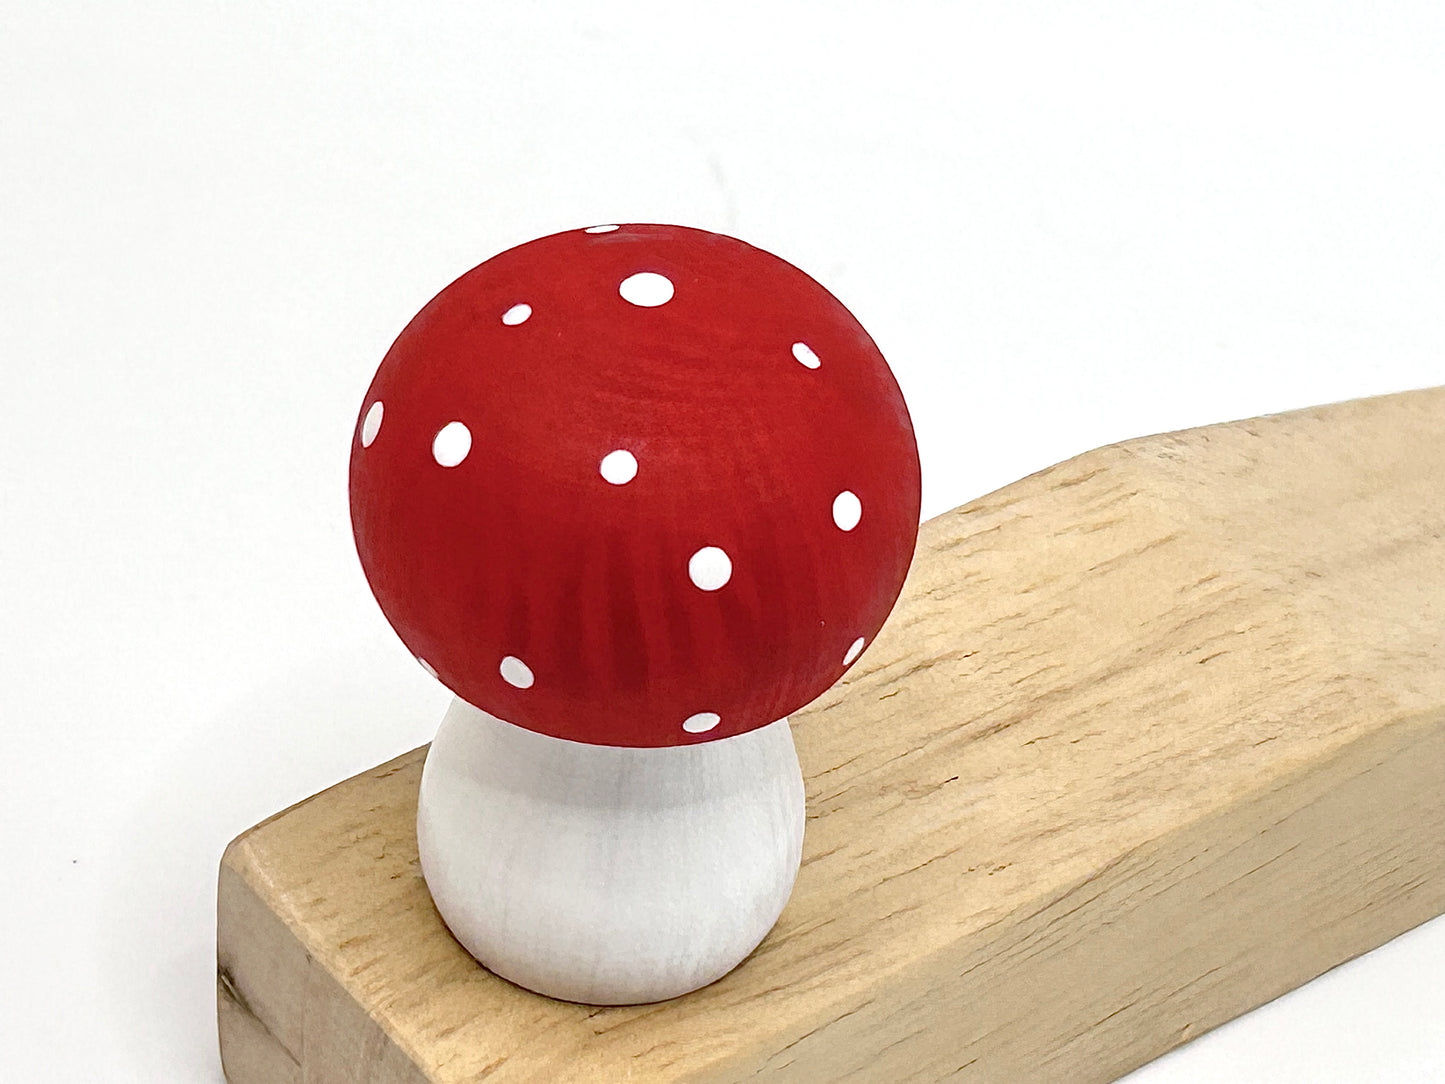 Enchanted Grove: Doorstop with Woodcarve Mushroom Ornament